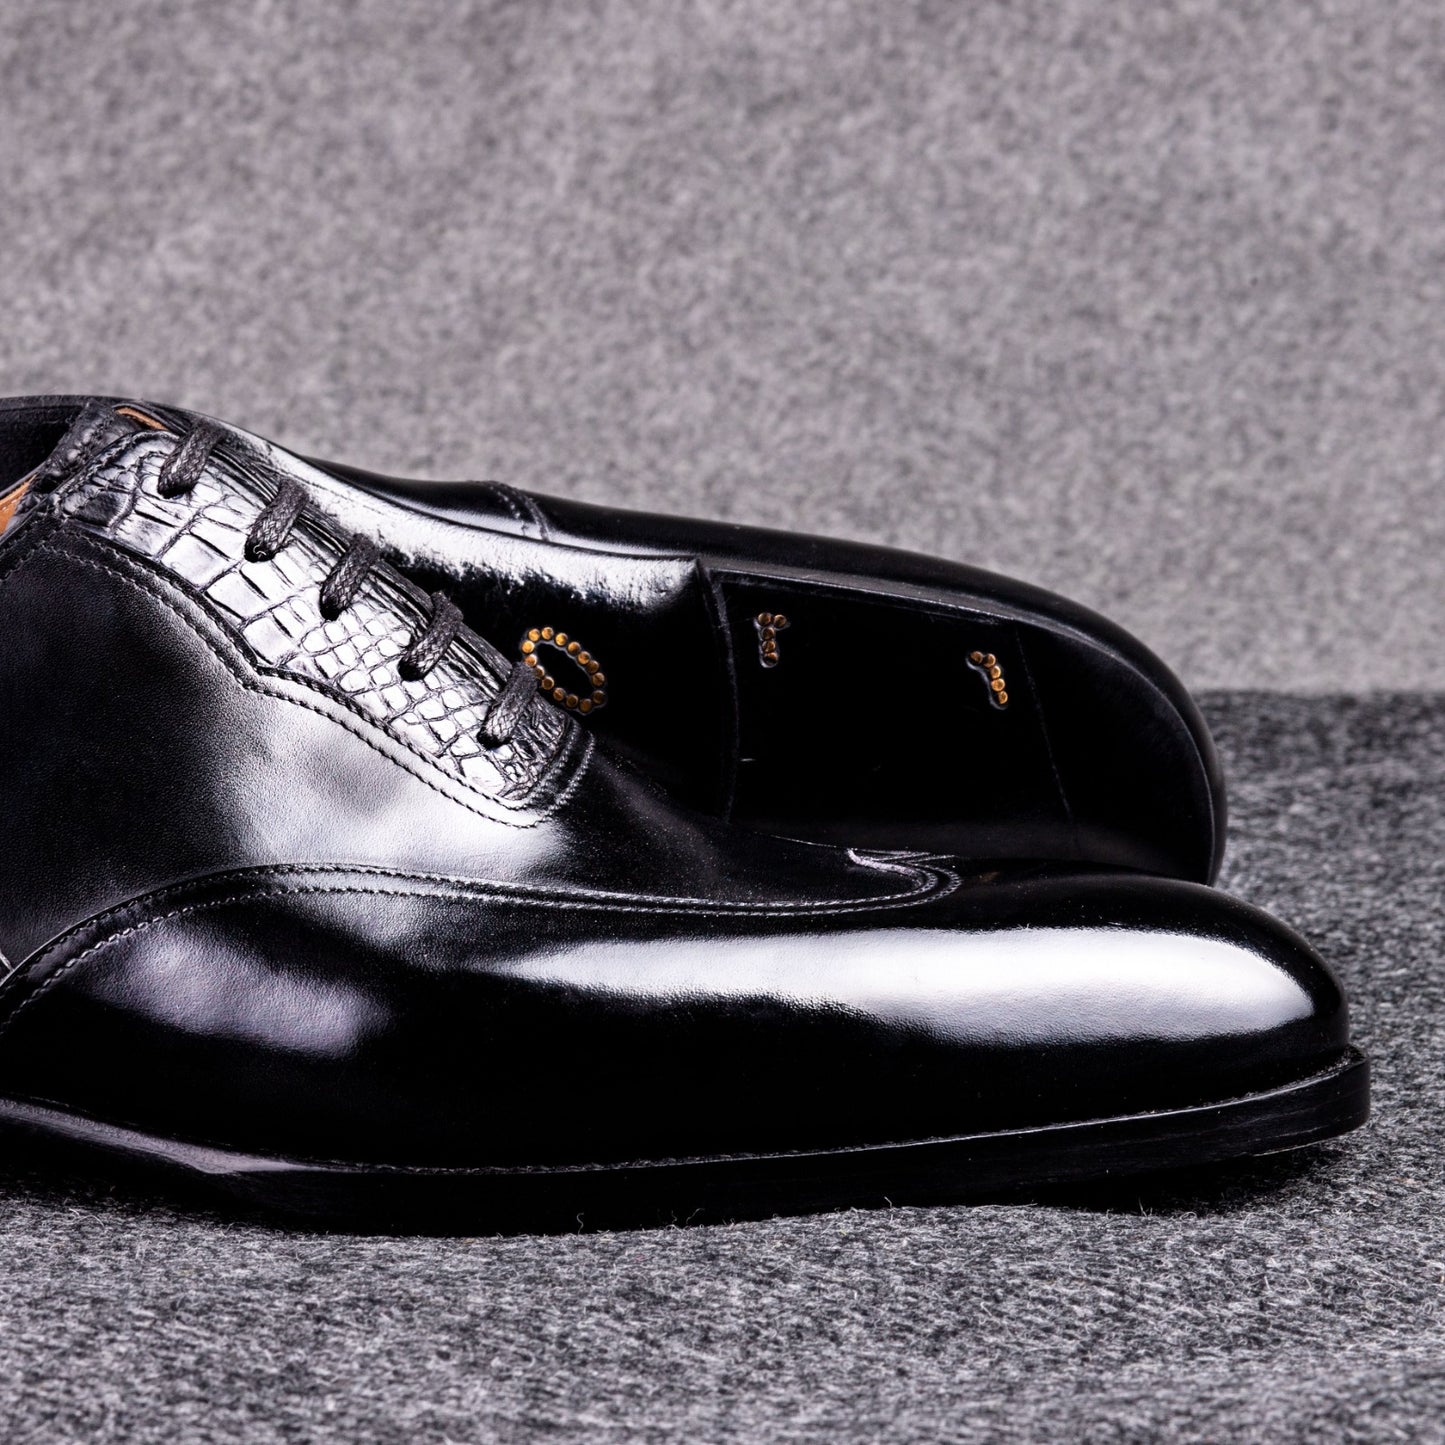 Wing Tip Oxford with Alligator Adelaide - all black!